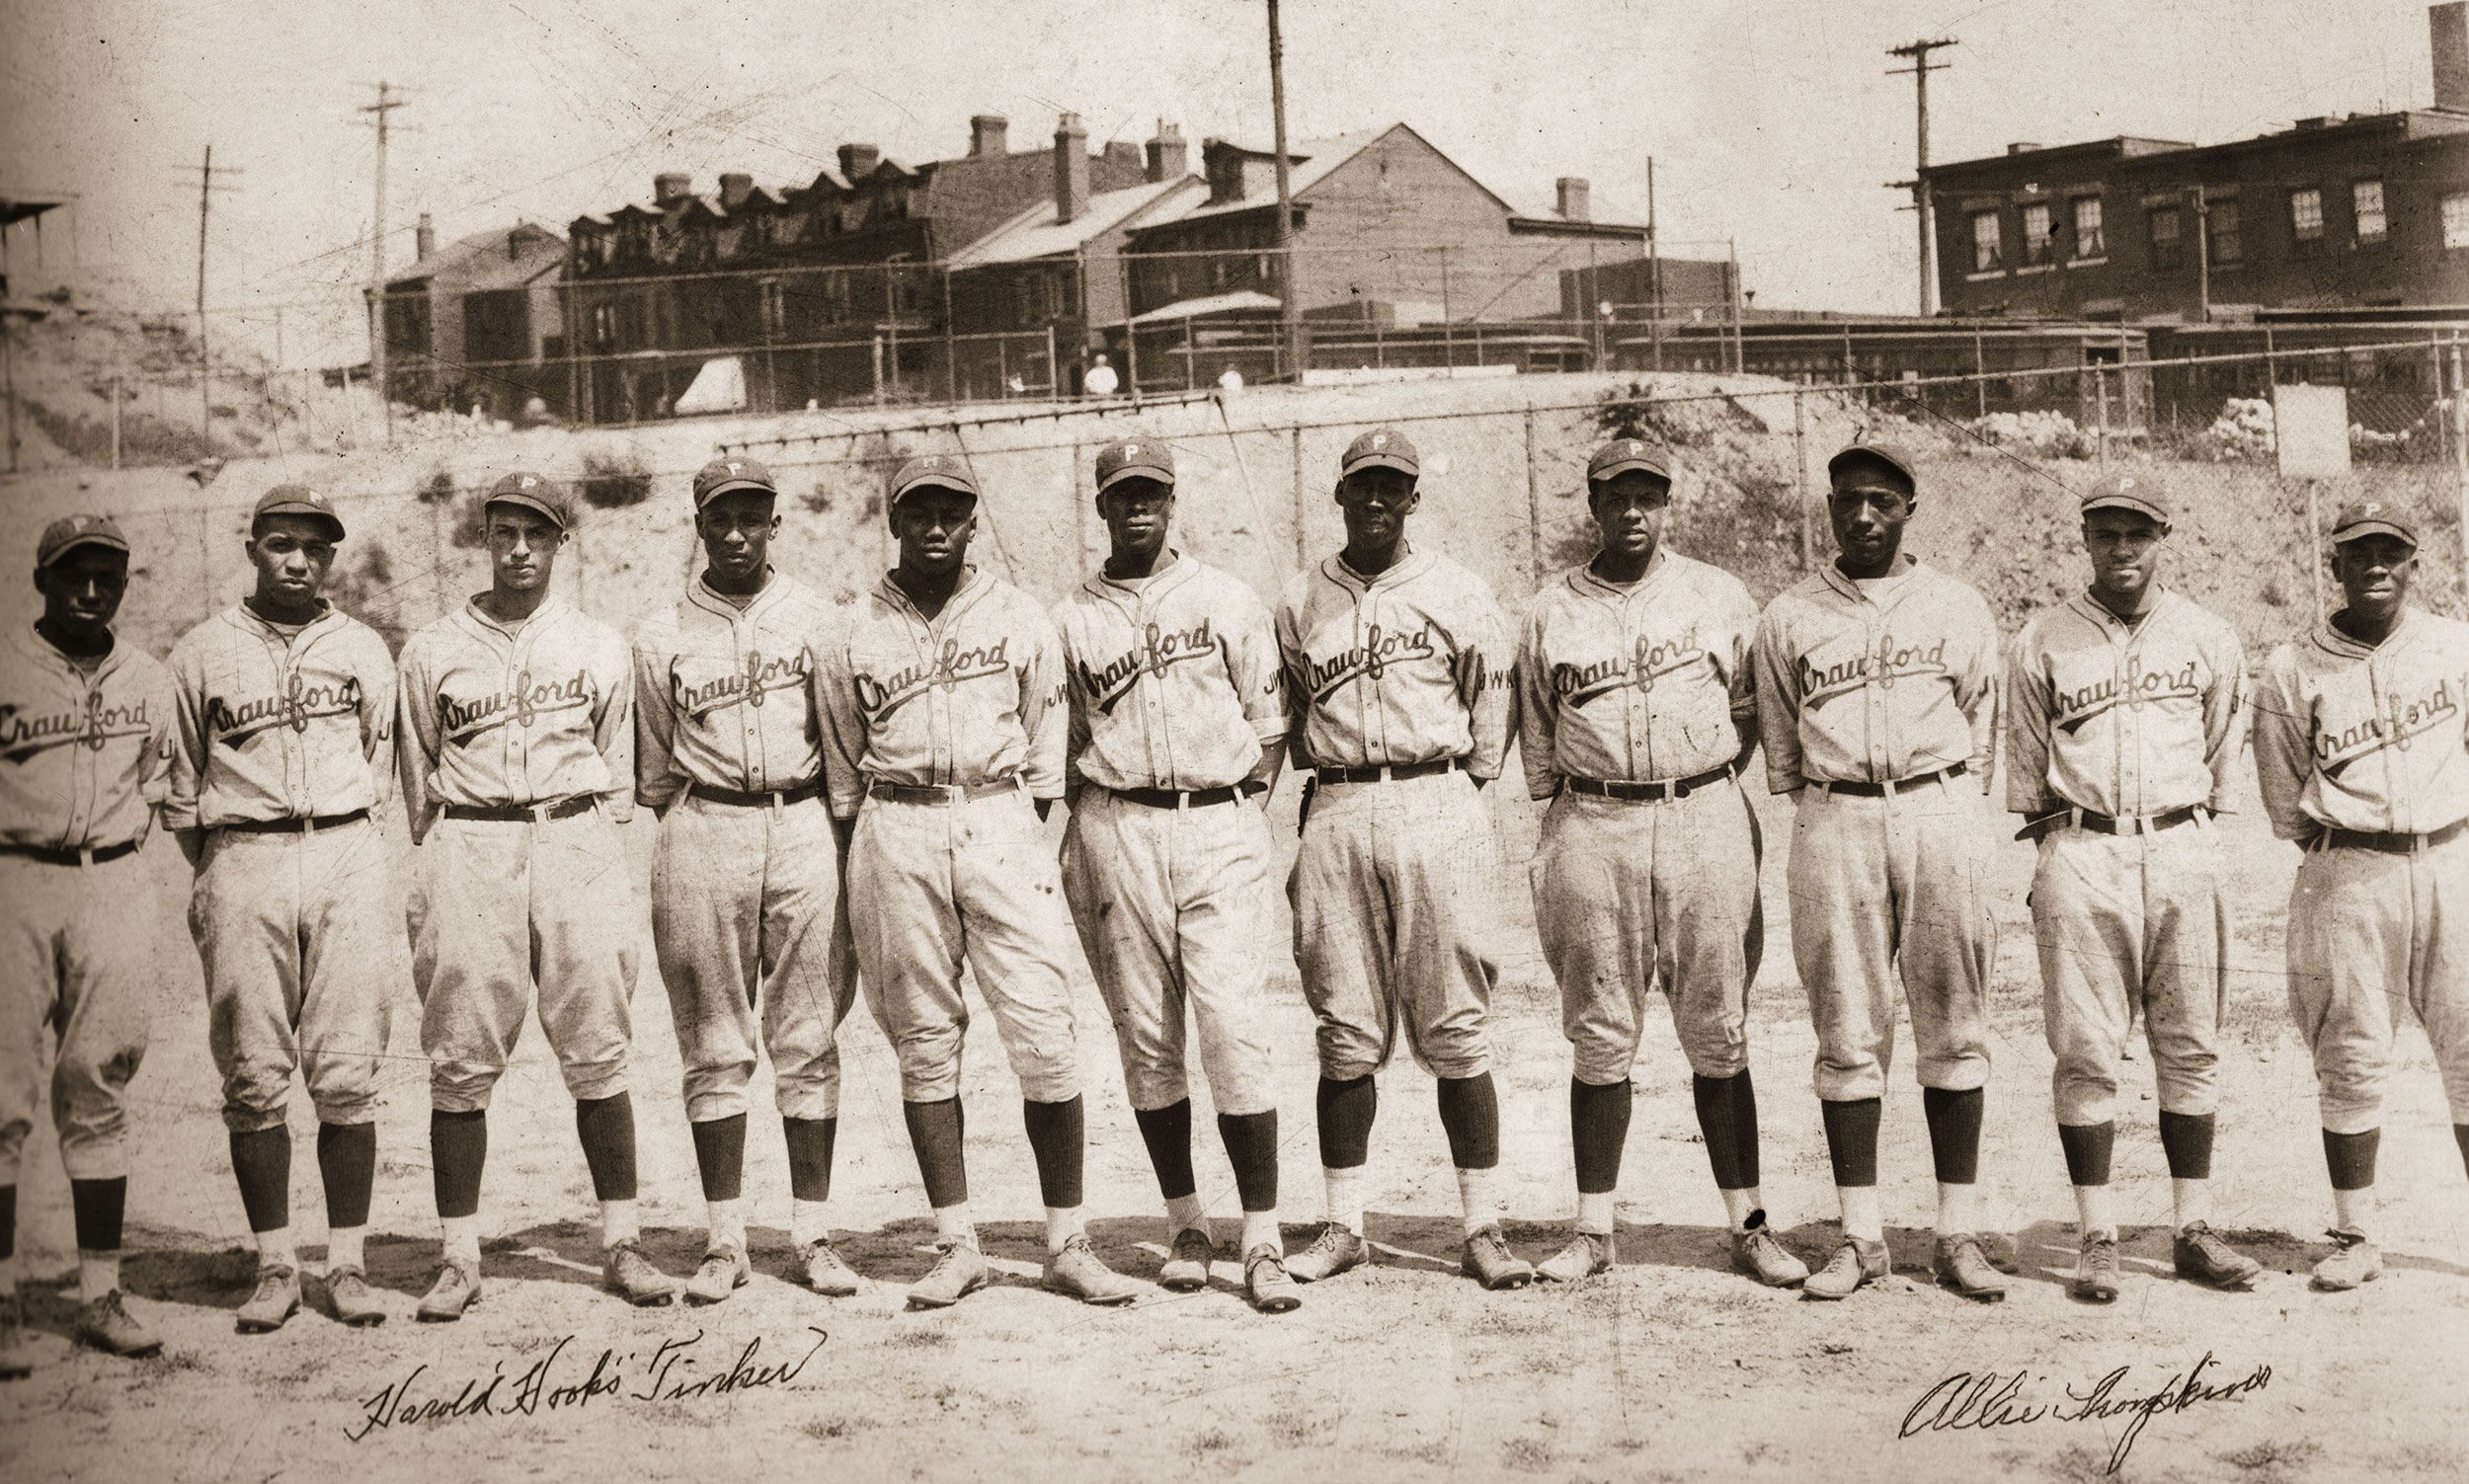 File:Mississippi Braves players wearing jerseys commemorating the Tougaloo  Nine.jpg - Wikipedia